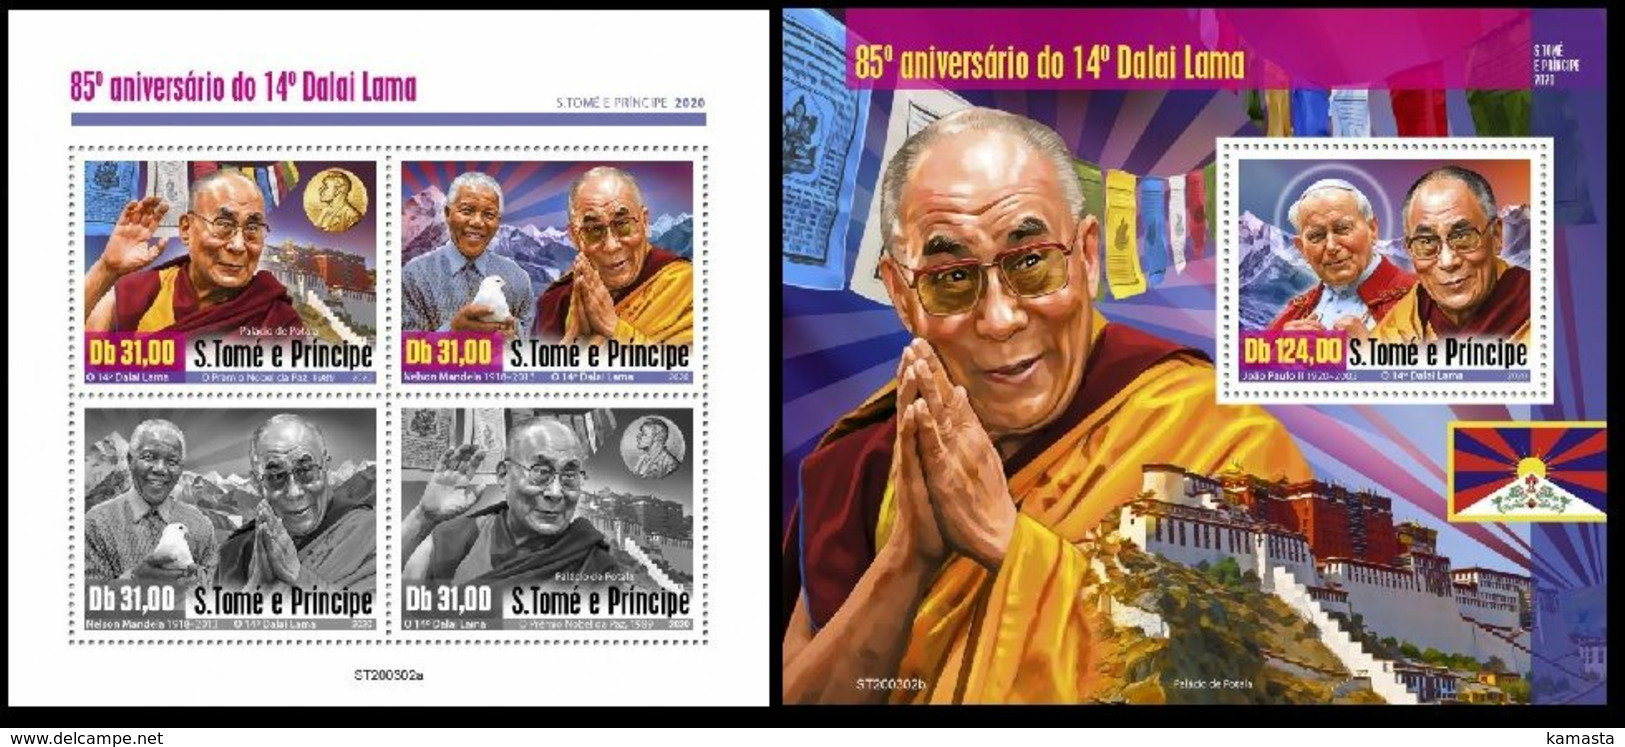 S.Tome&Principe. 2020 85th Anniversary Of The 14th Dalai Lama.Pope John Paul II. (0302ab)  OFFICIAL ISSUE - Buddhism